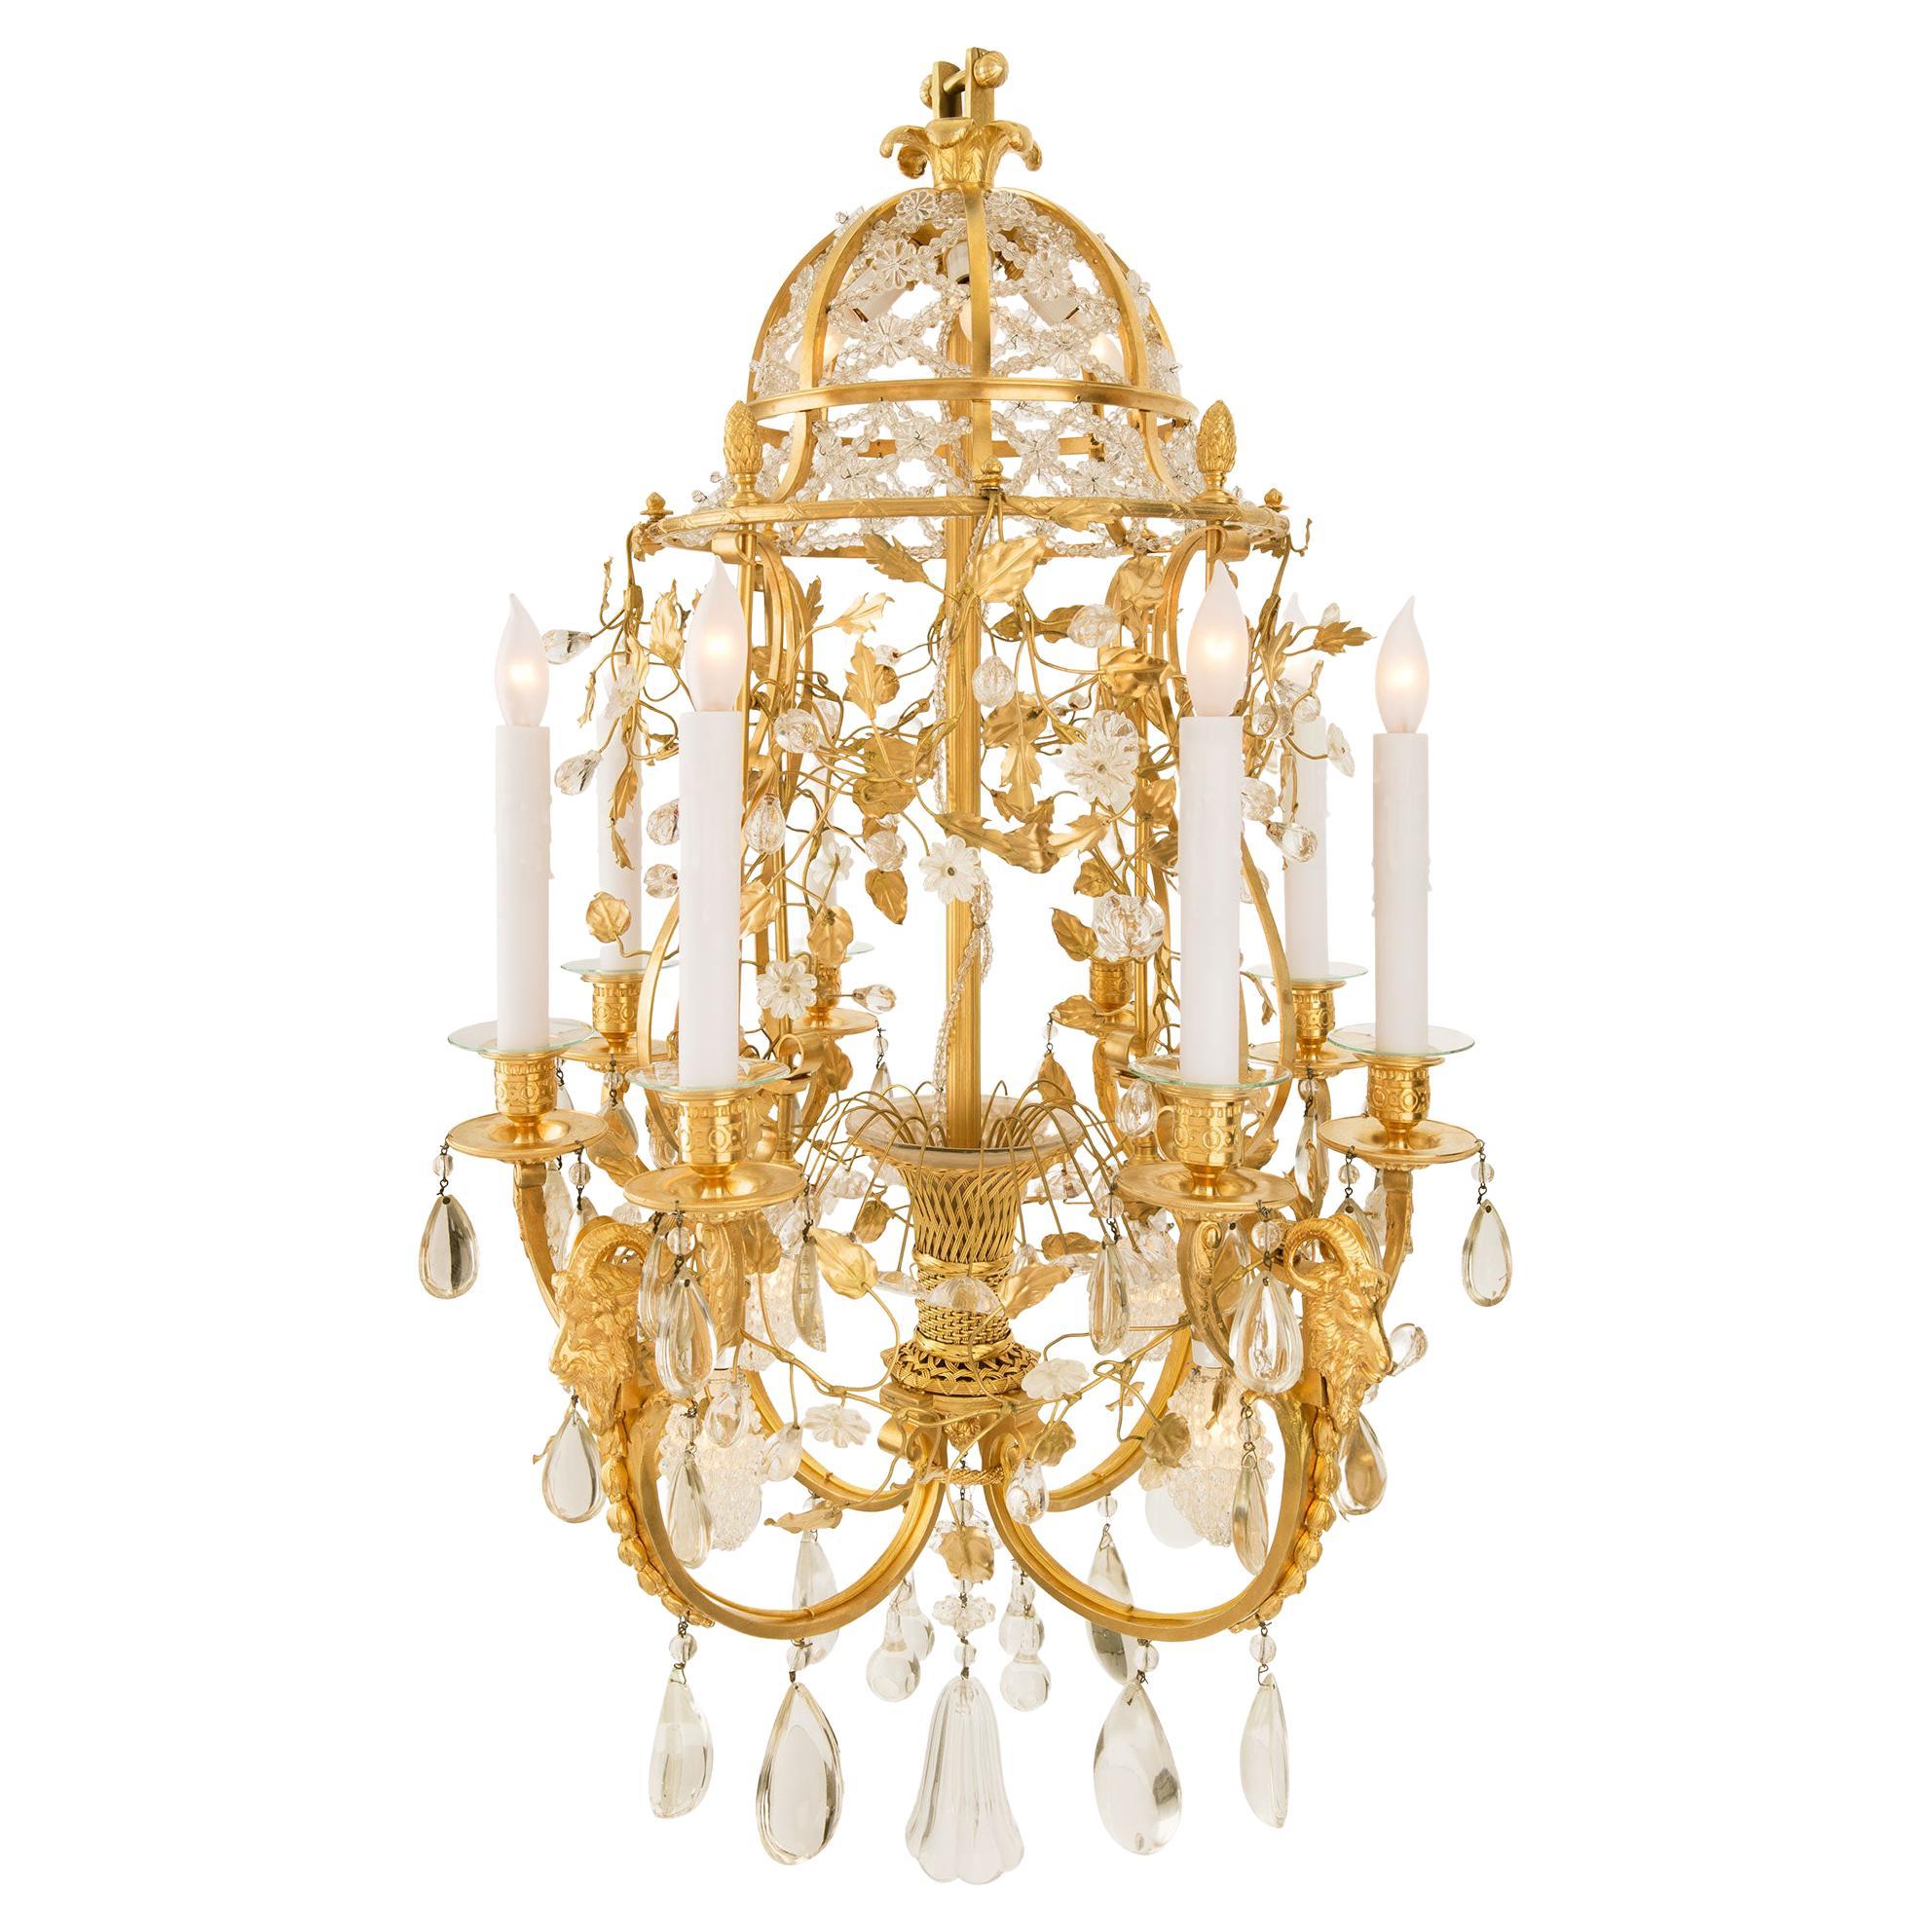 French 19th Century Belle Époque Period Ormolu and Baccarat Crystal Chandelier